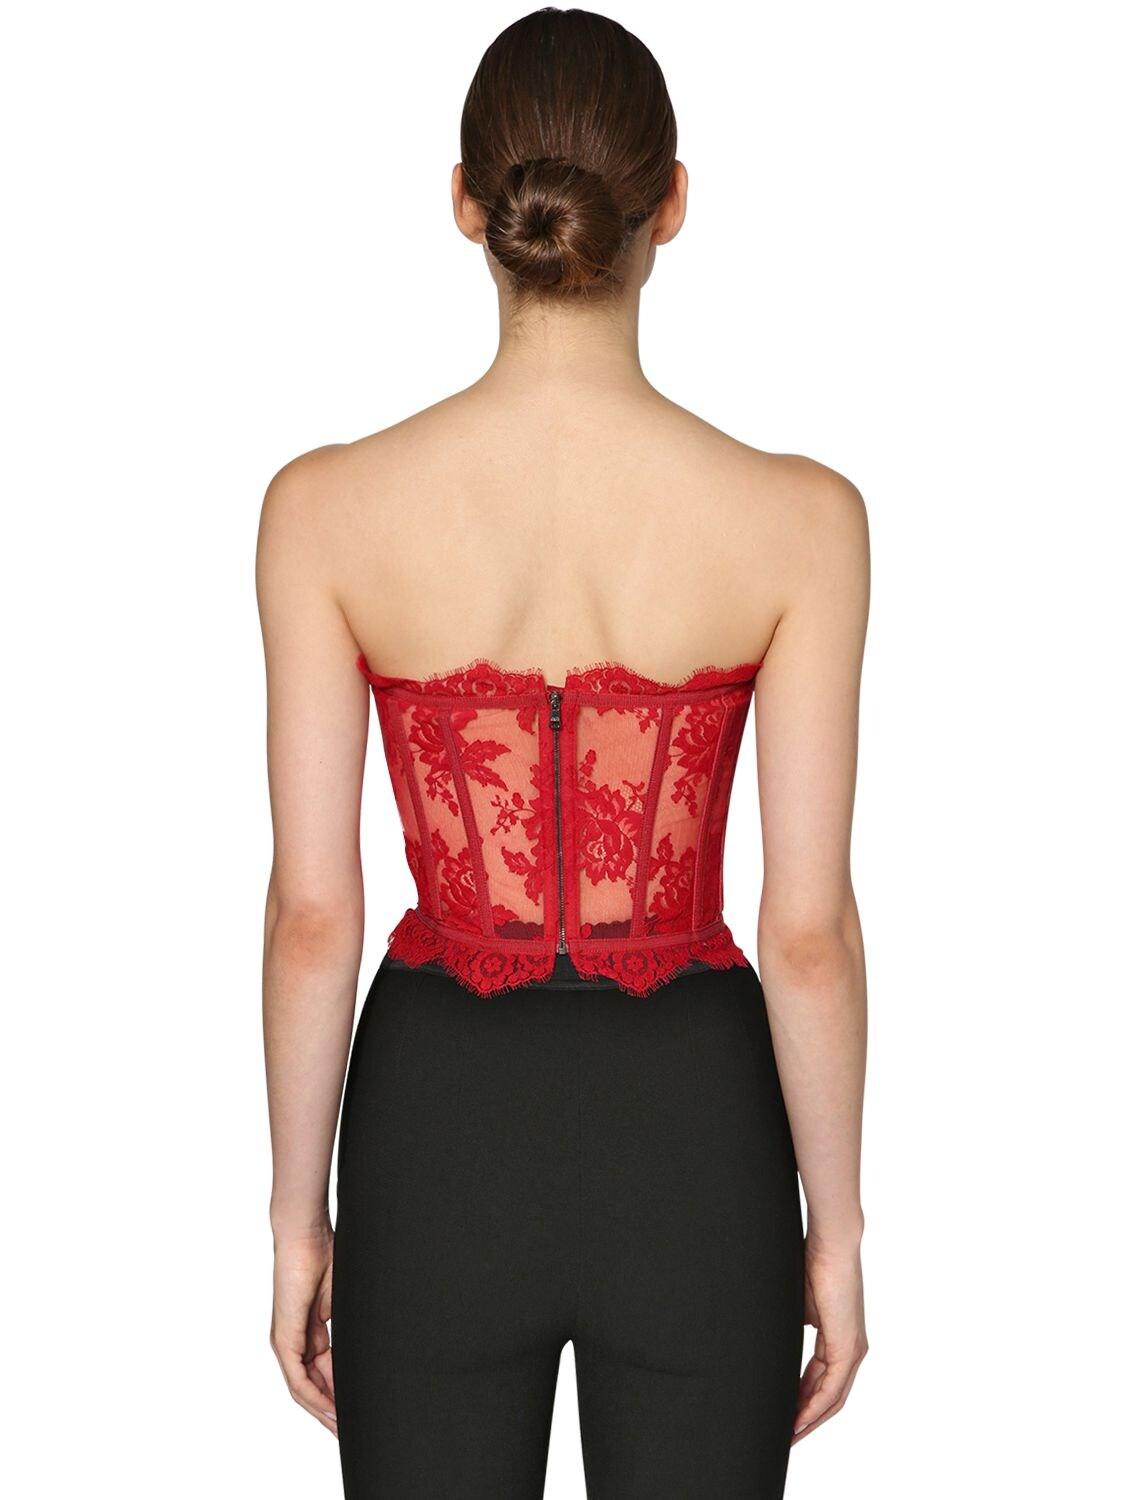 Dolce & Gabbana Chantilly Lace Bustier Top in Red | Lyst